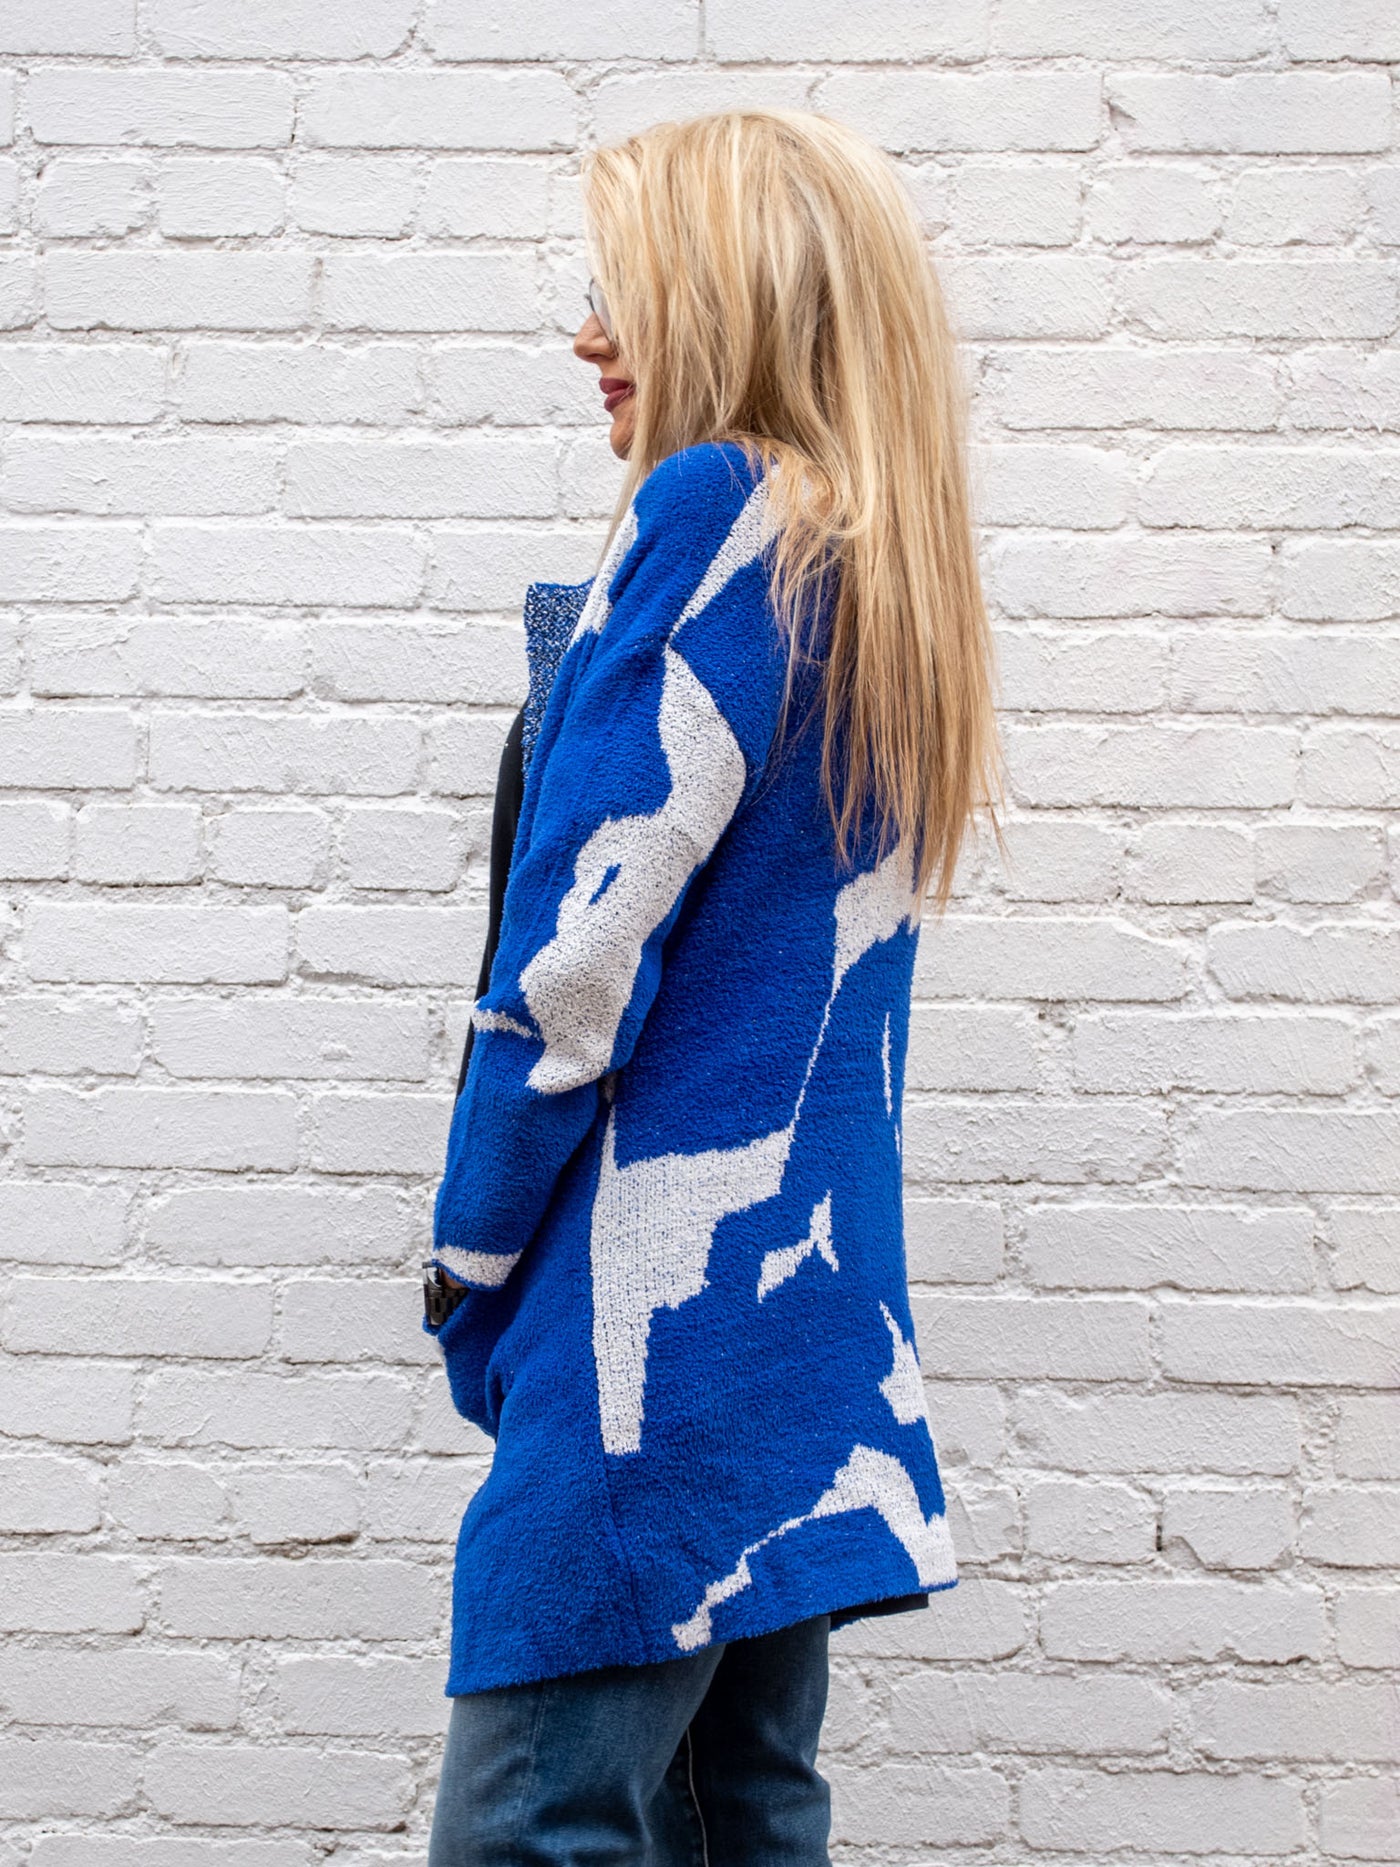 A model wearing a blue, white and black printed cardigan. The model has it paired over a medium wash jean and black top.